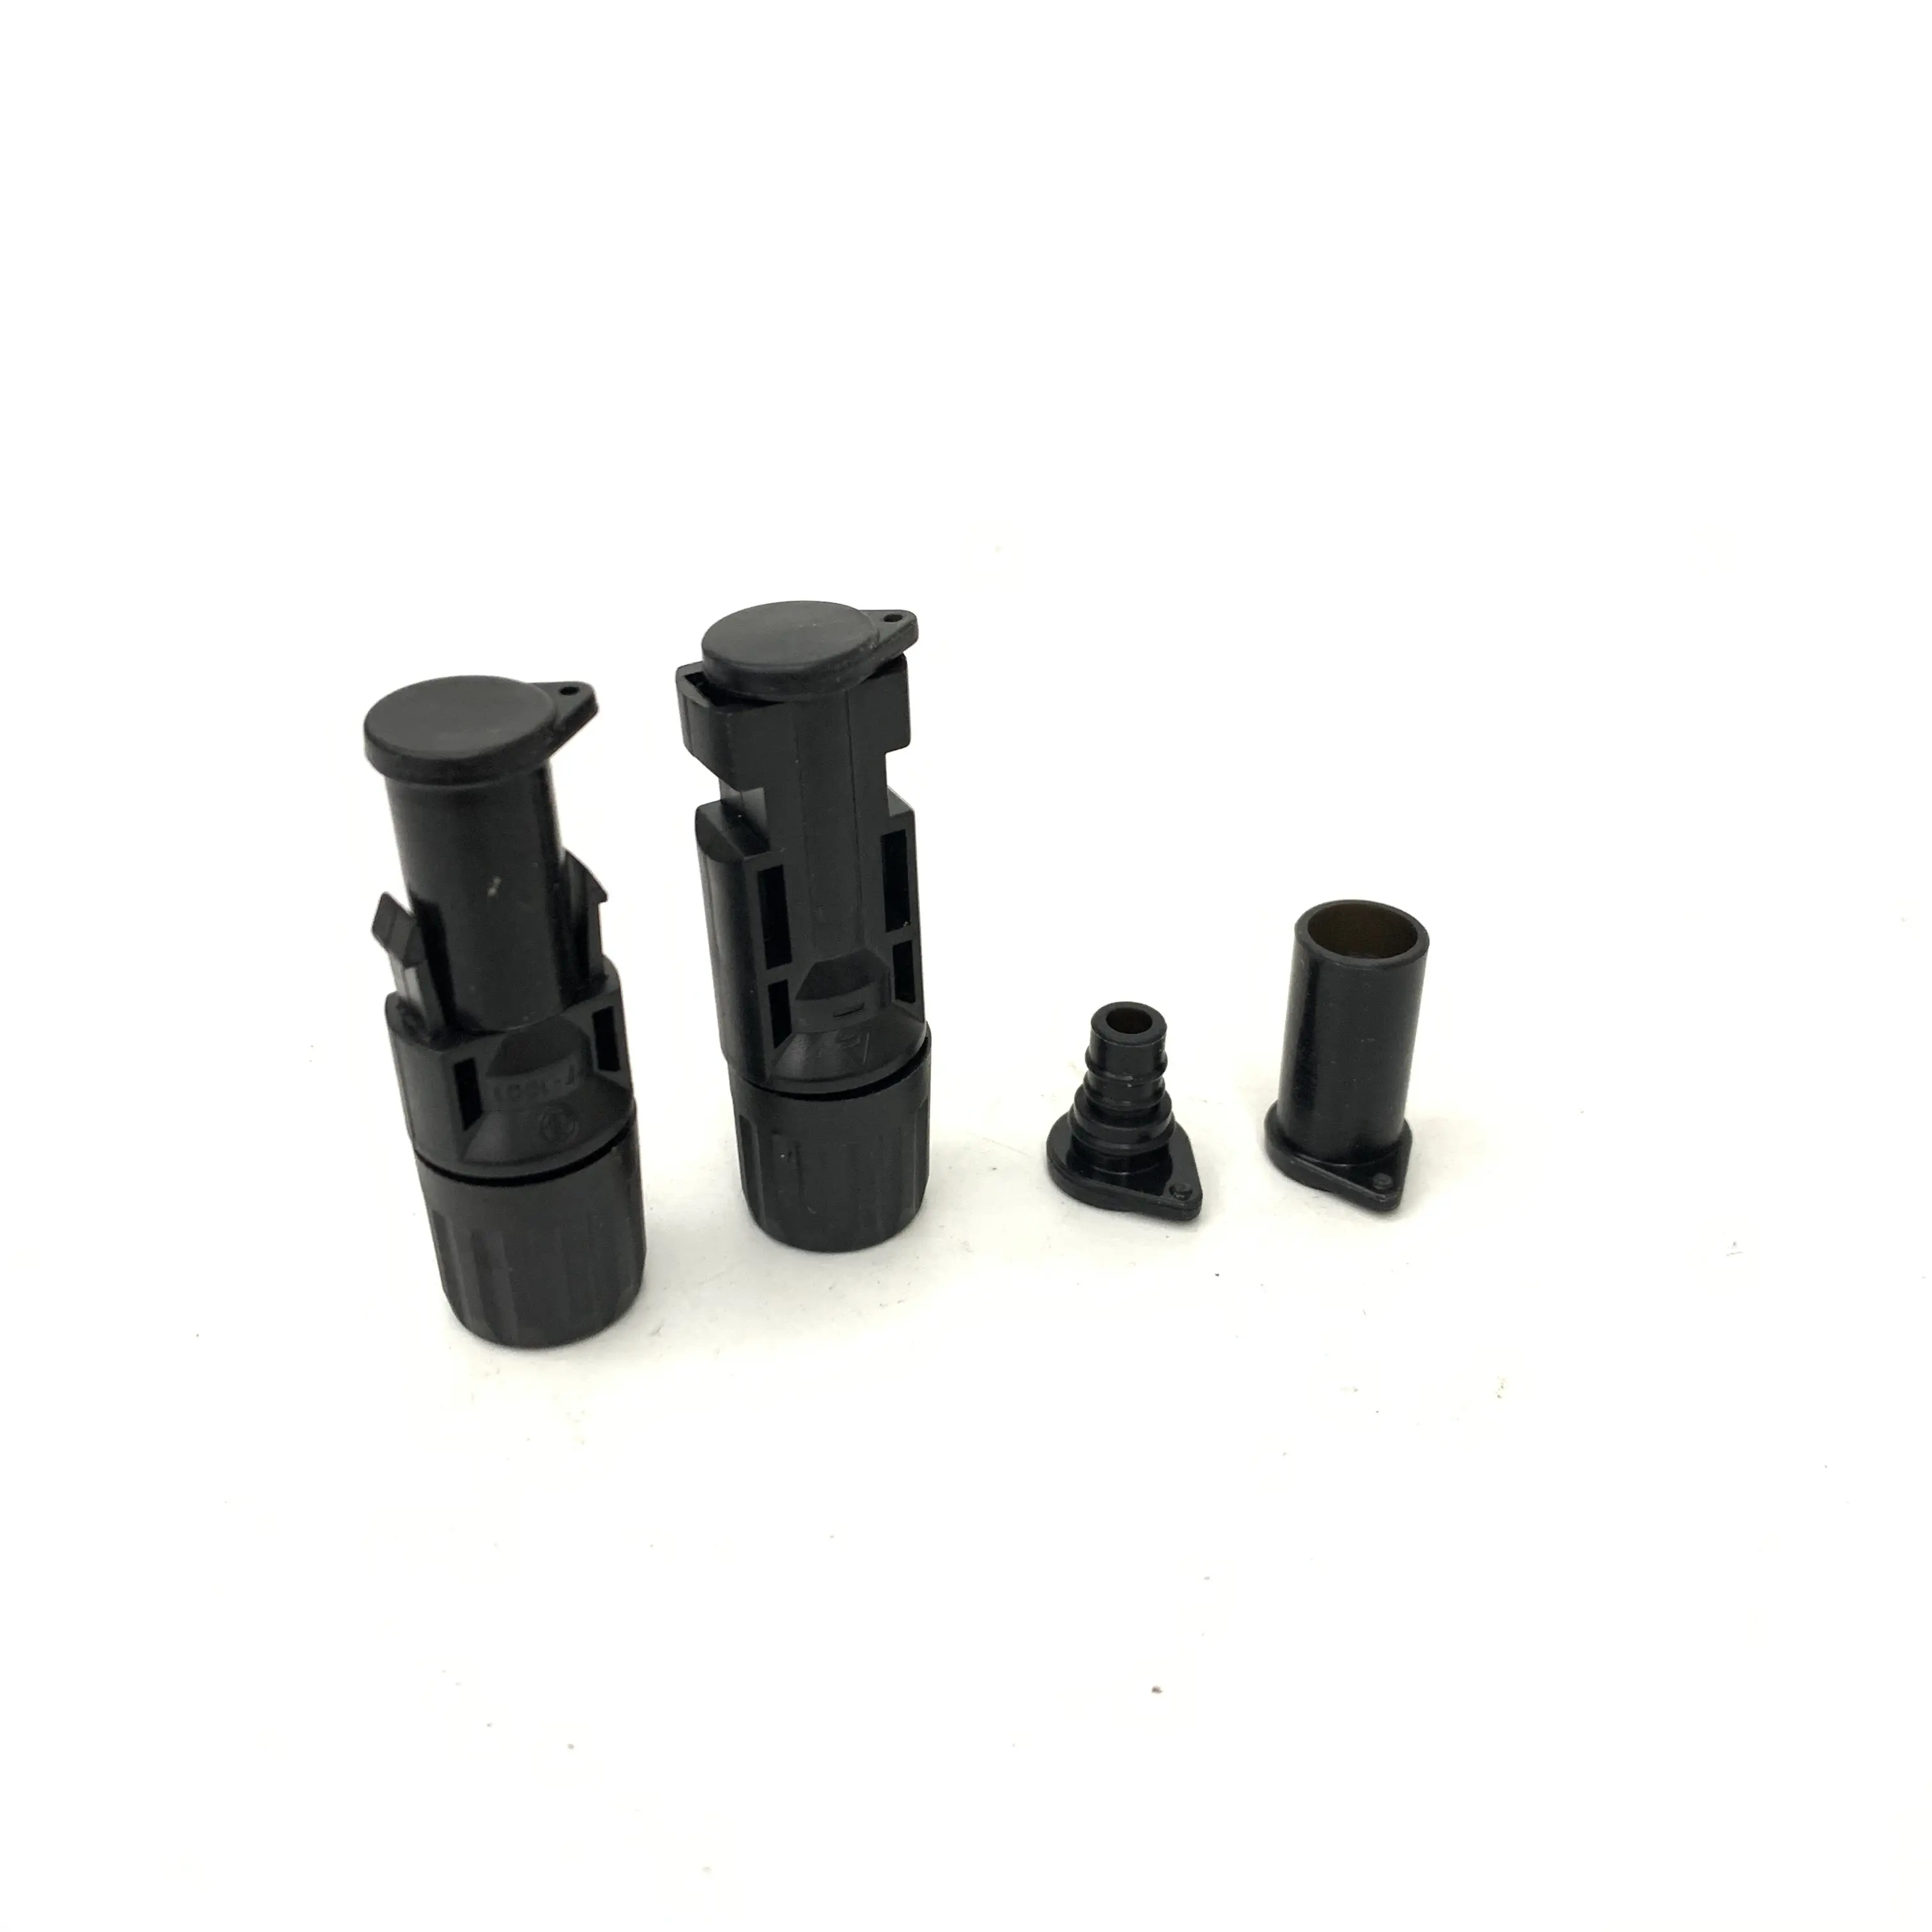 black rubber protection dust caps for solar connector